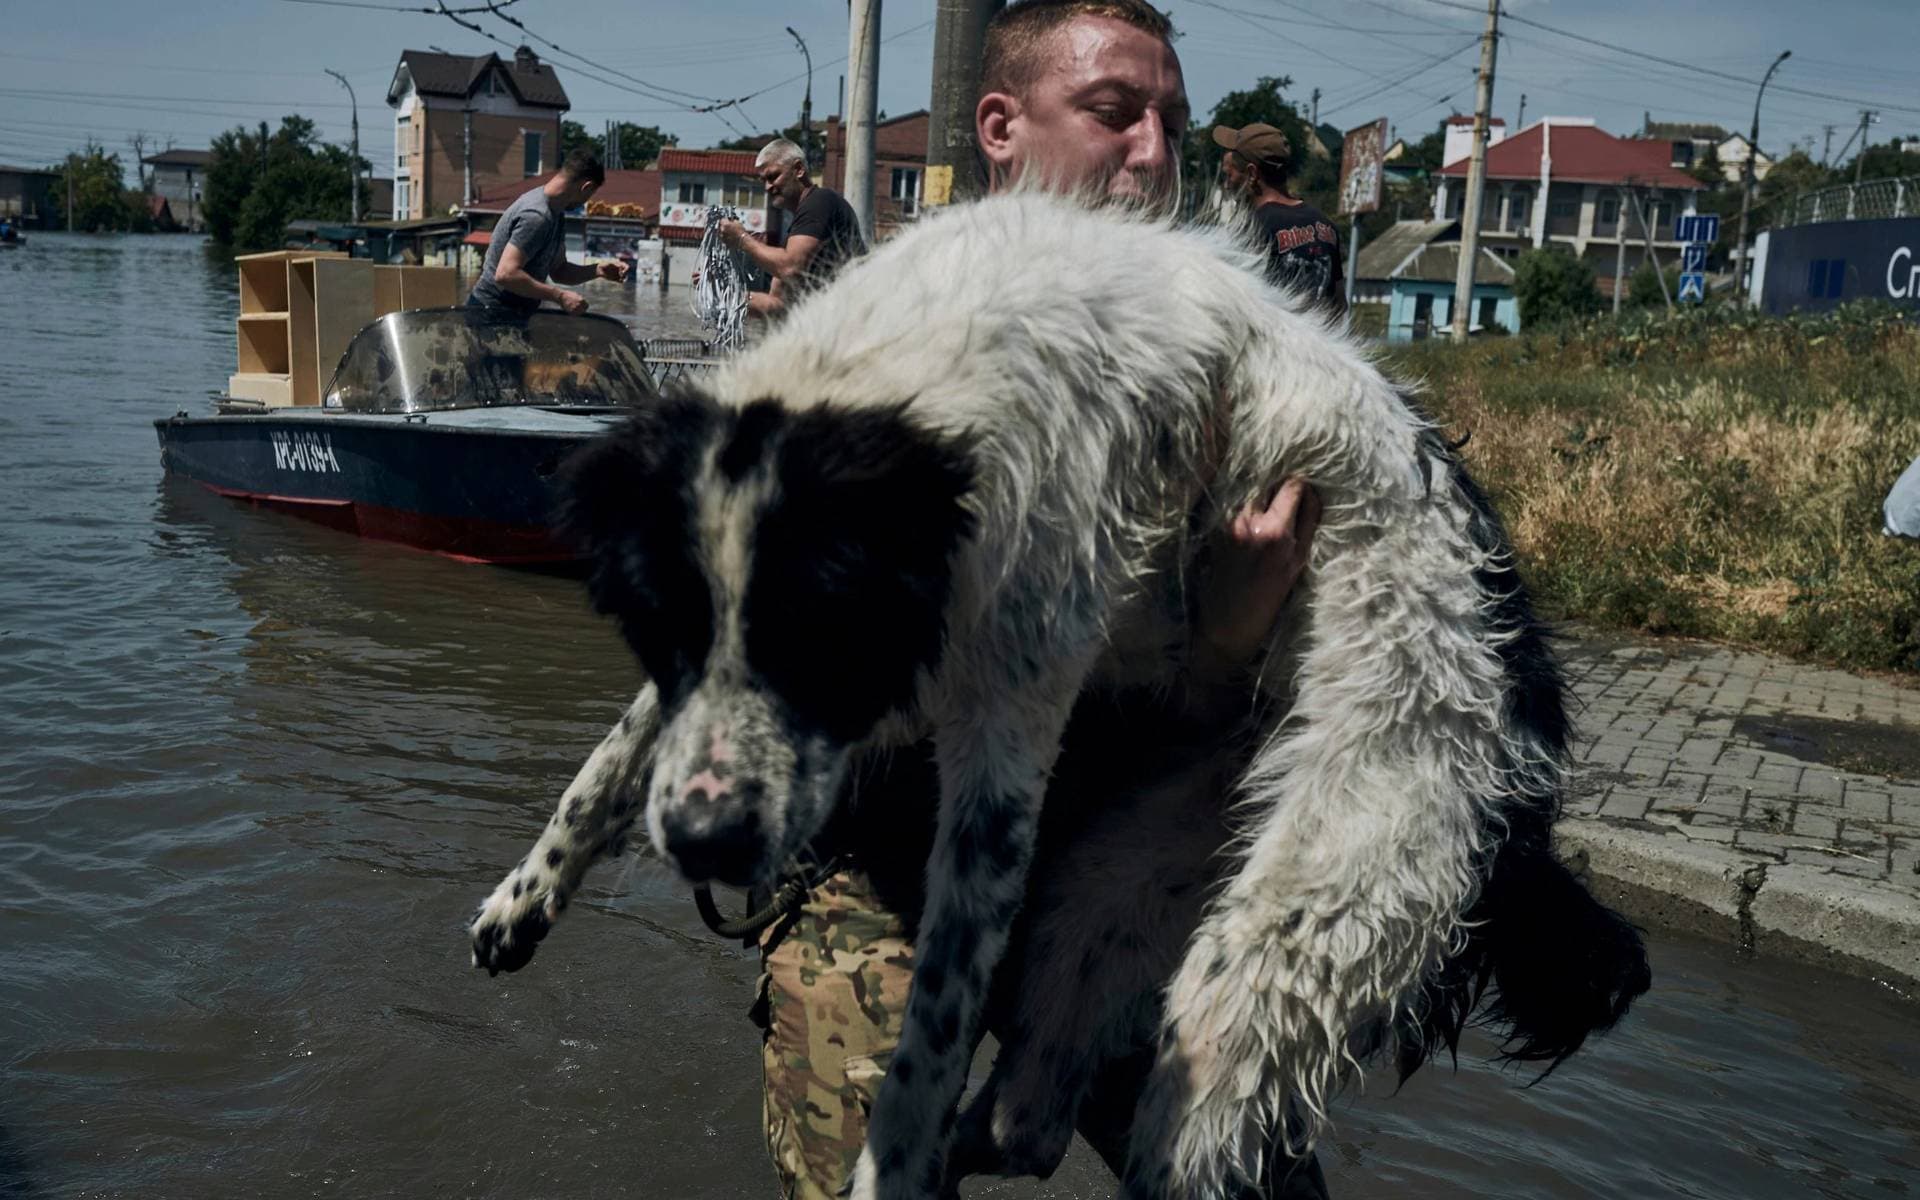 Ukrainians have been searching for missing pets in the flooded area